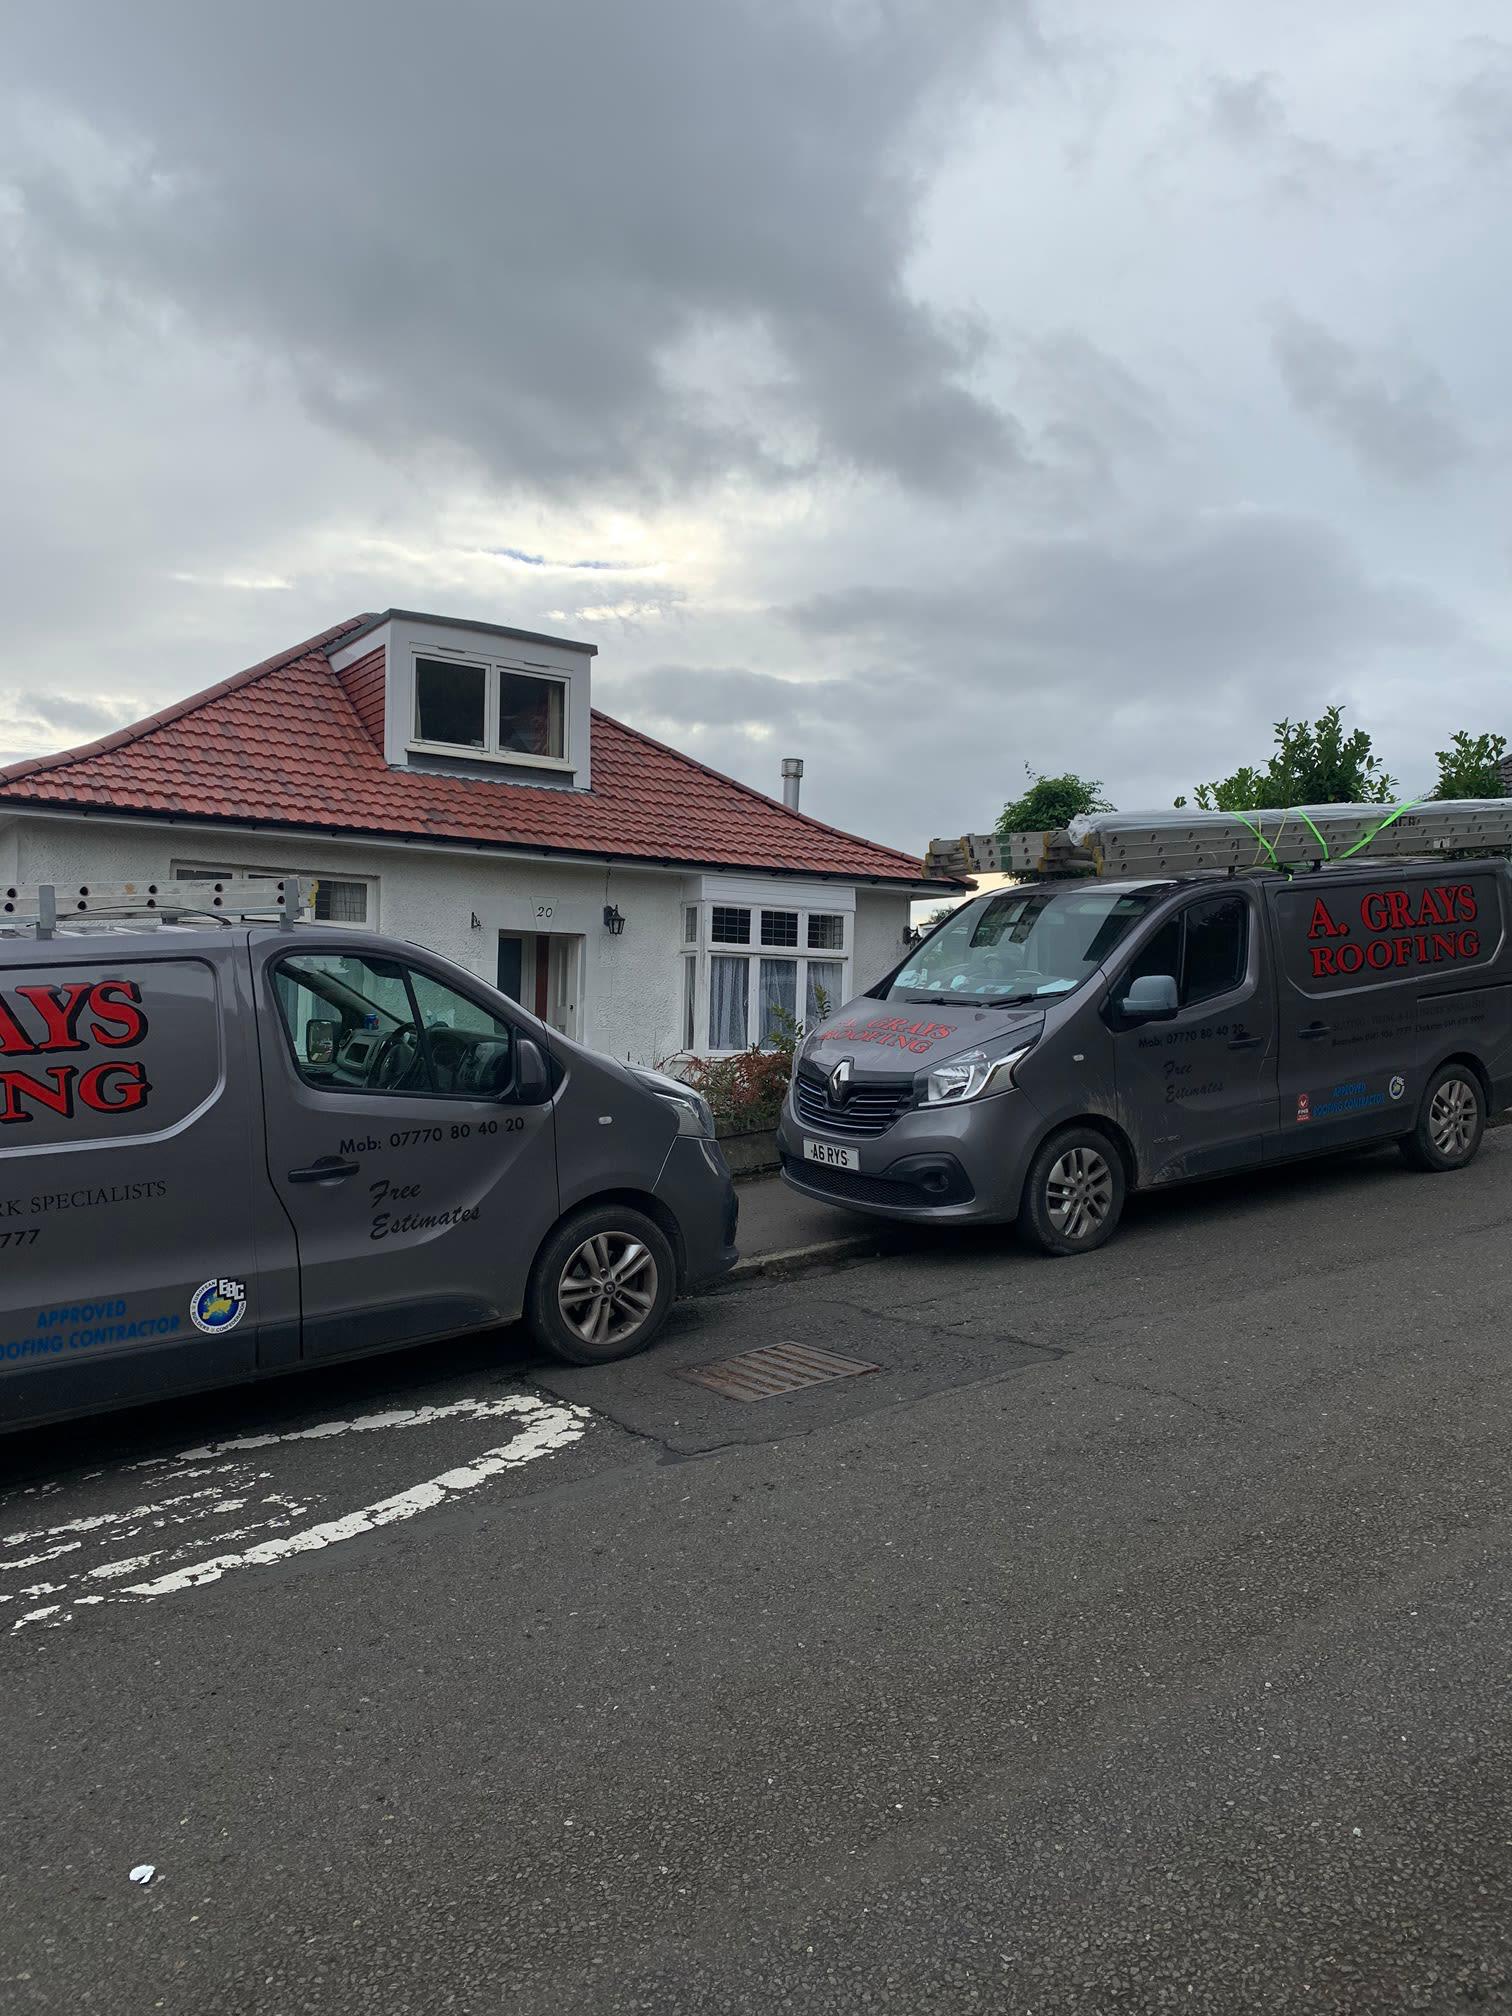 Images A Grays Roofing